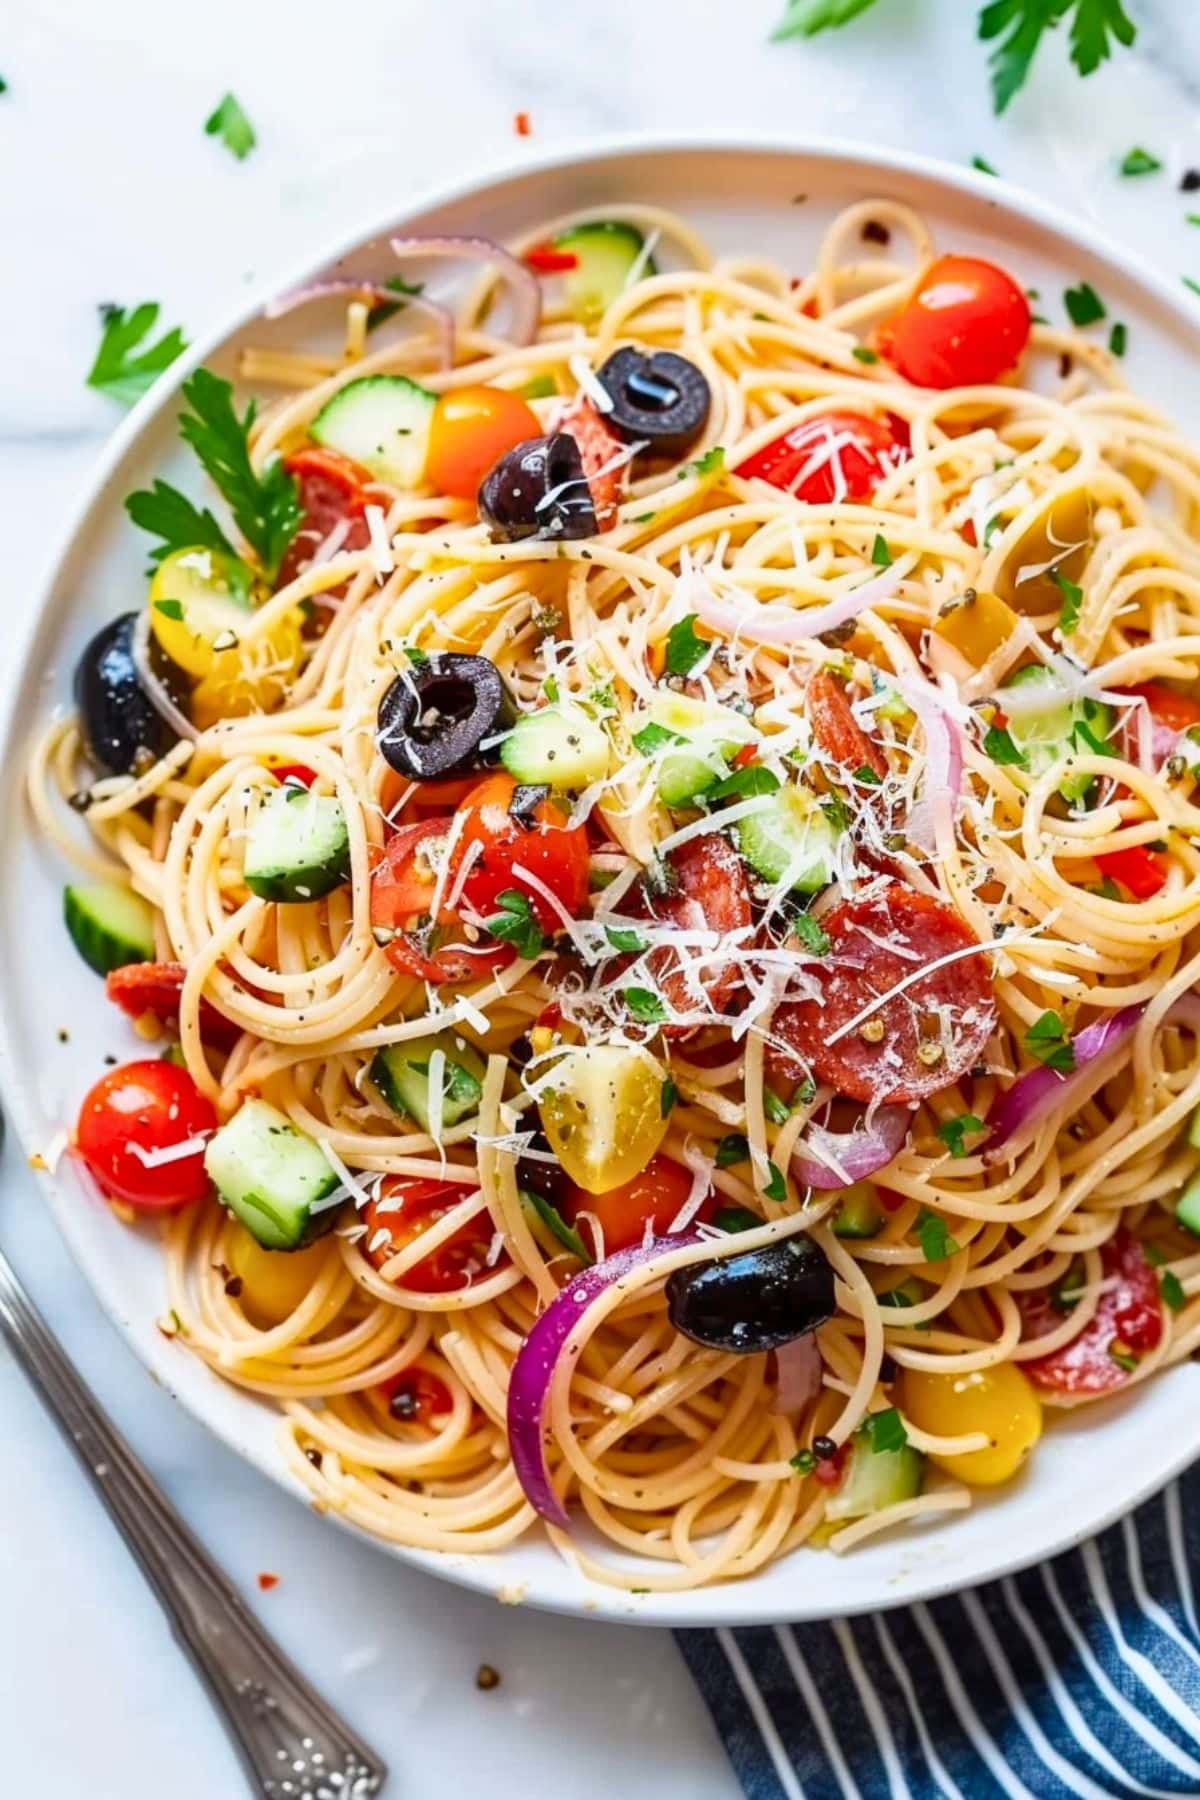 Italian spaghetti pasta made with made with thin spaghetti broken into thirds, grated Parmesan cheese, seeded and chopped red bell pepper, thinly sliced red onion, halved cherry tomatoes, and mini pepperoni, sliced black olives served in a white plate, fork on the side.